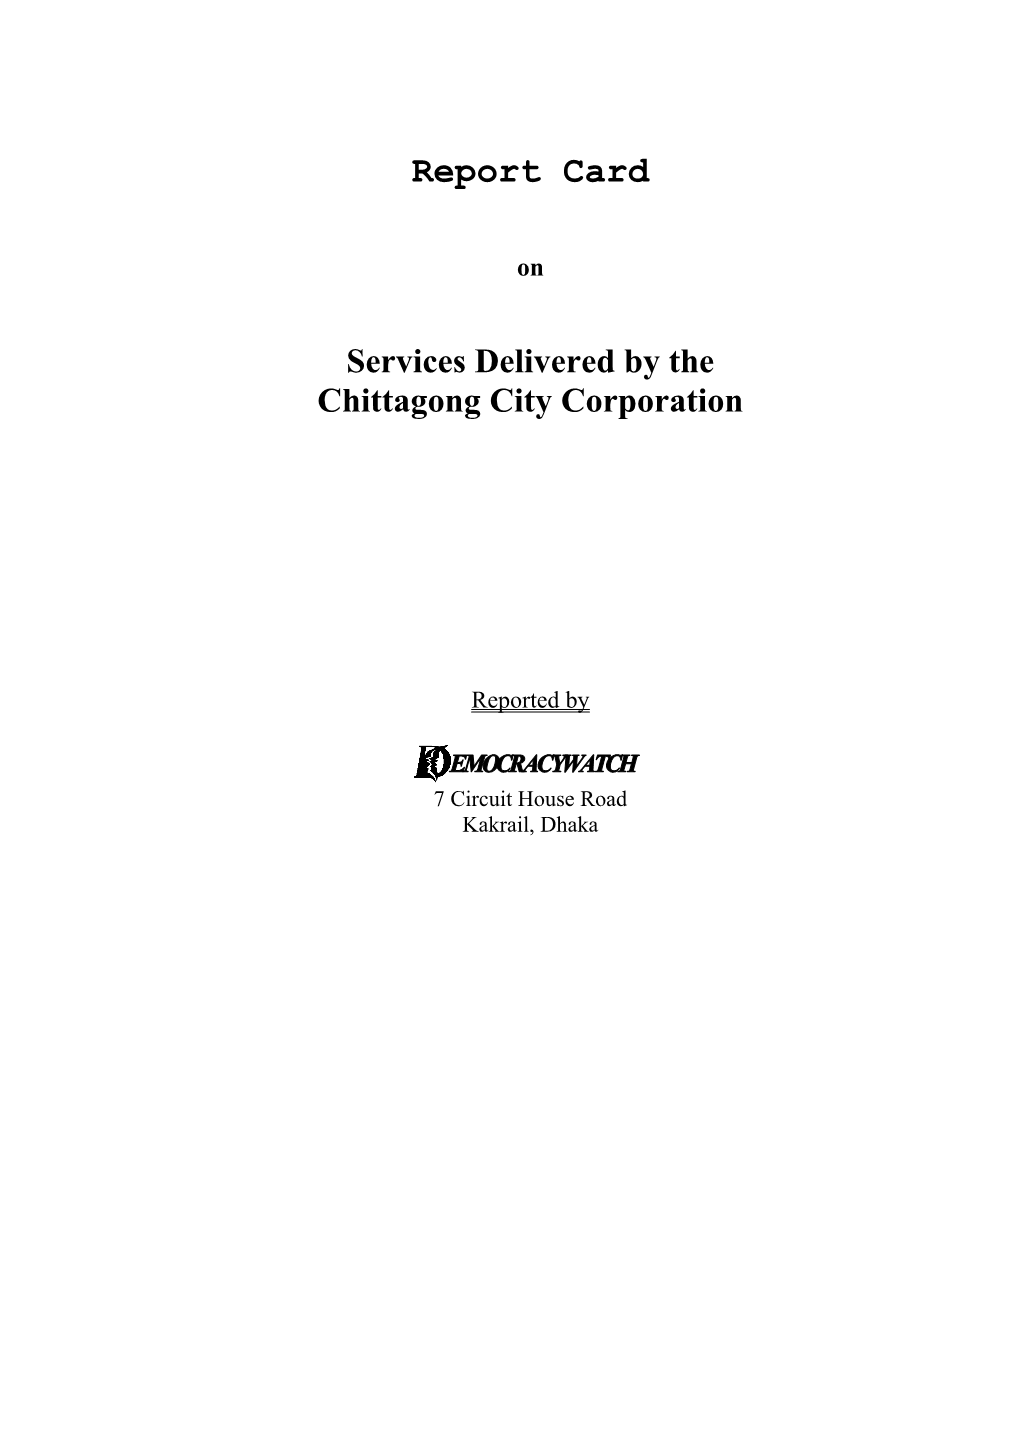 Knowledge About the Services of the Chittagong City Corporation (CCC)